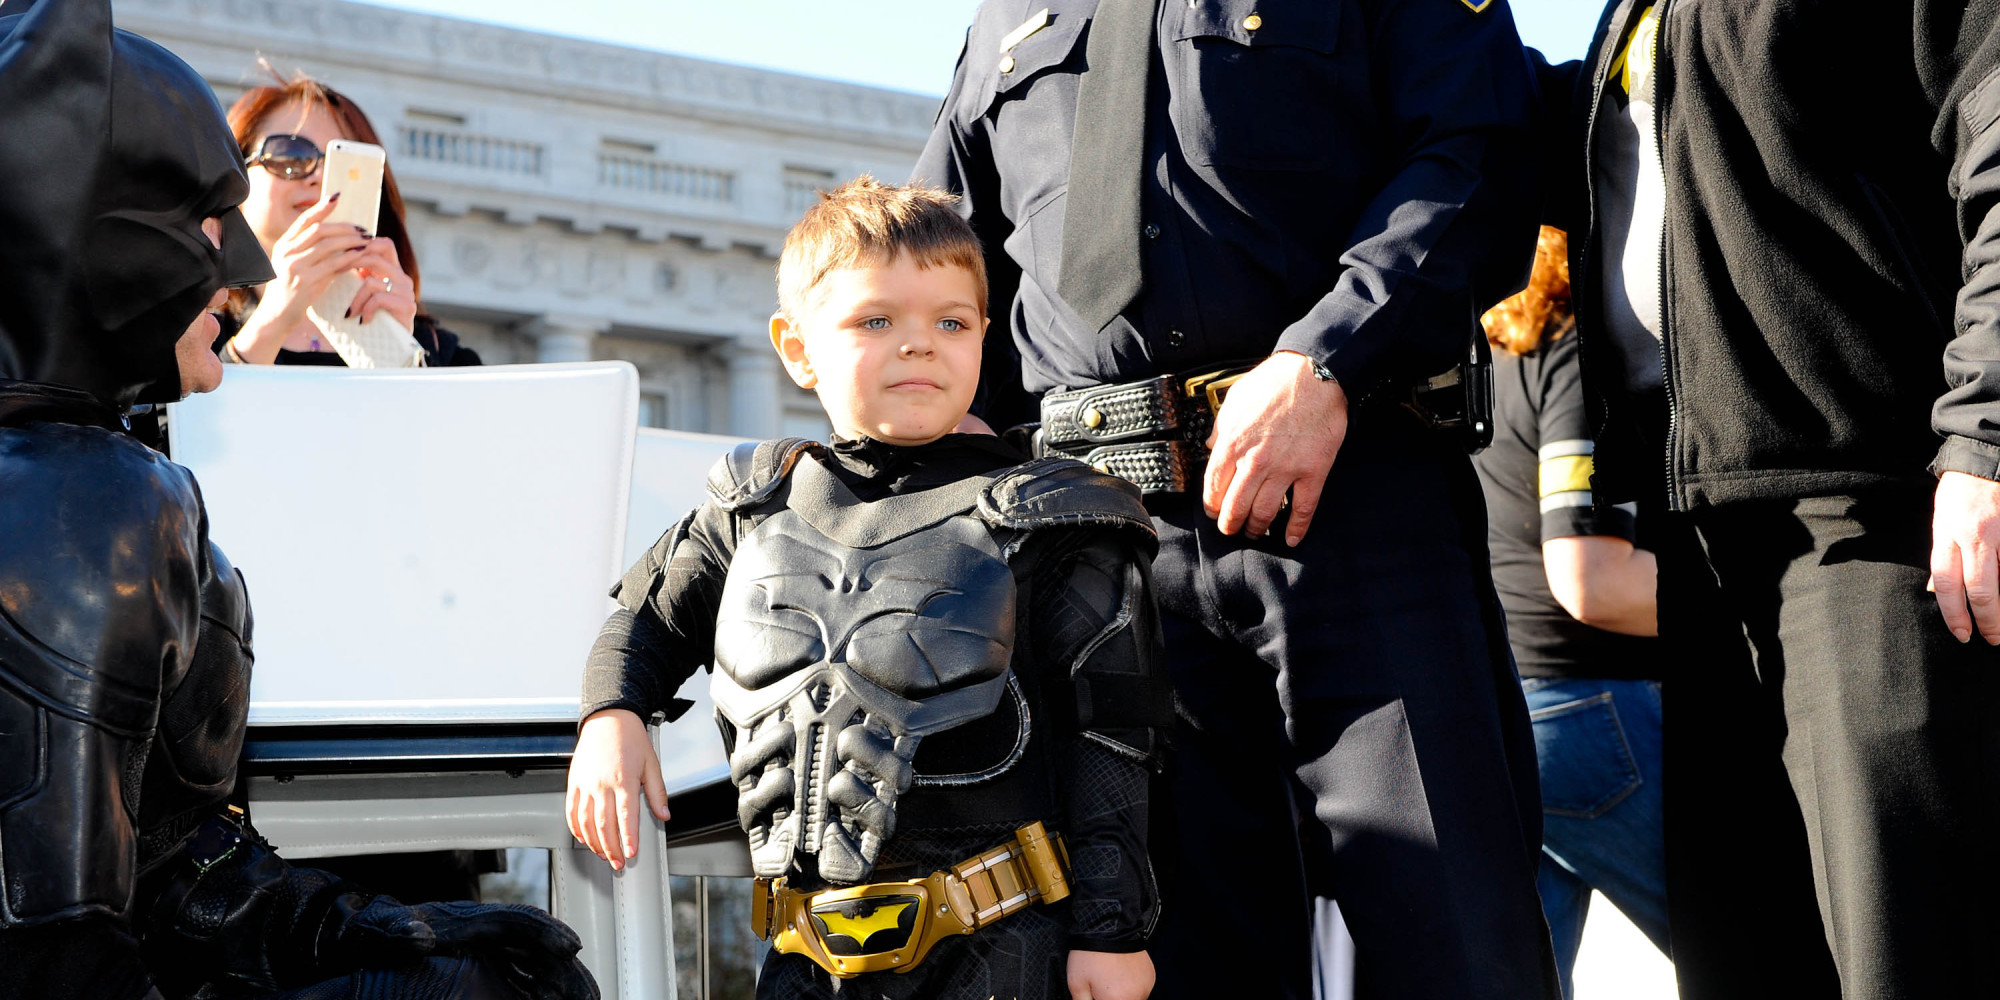 Make A Wish Foundation Grants 5 Year Old Miles' Wish To Be Batman